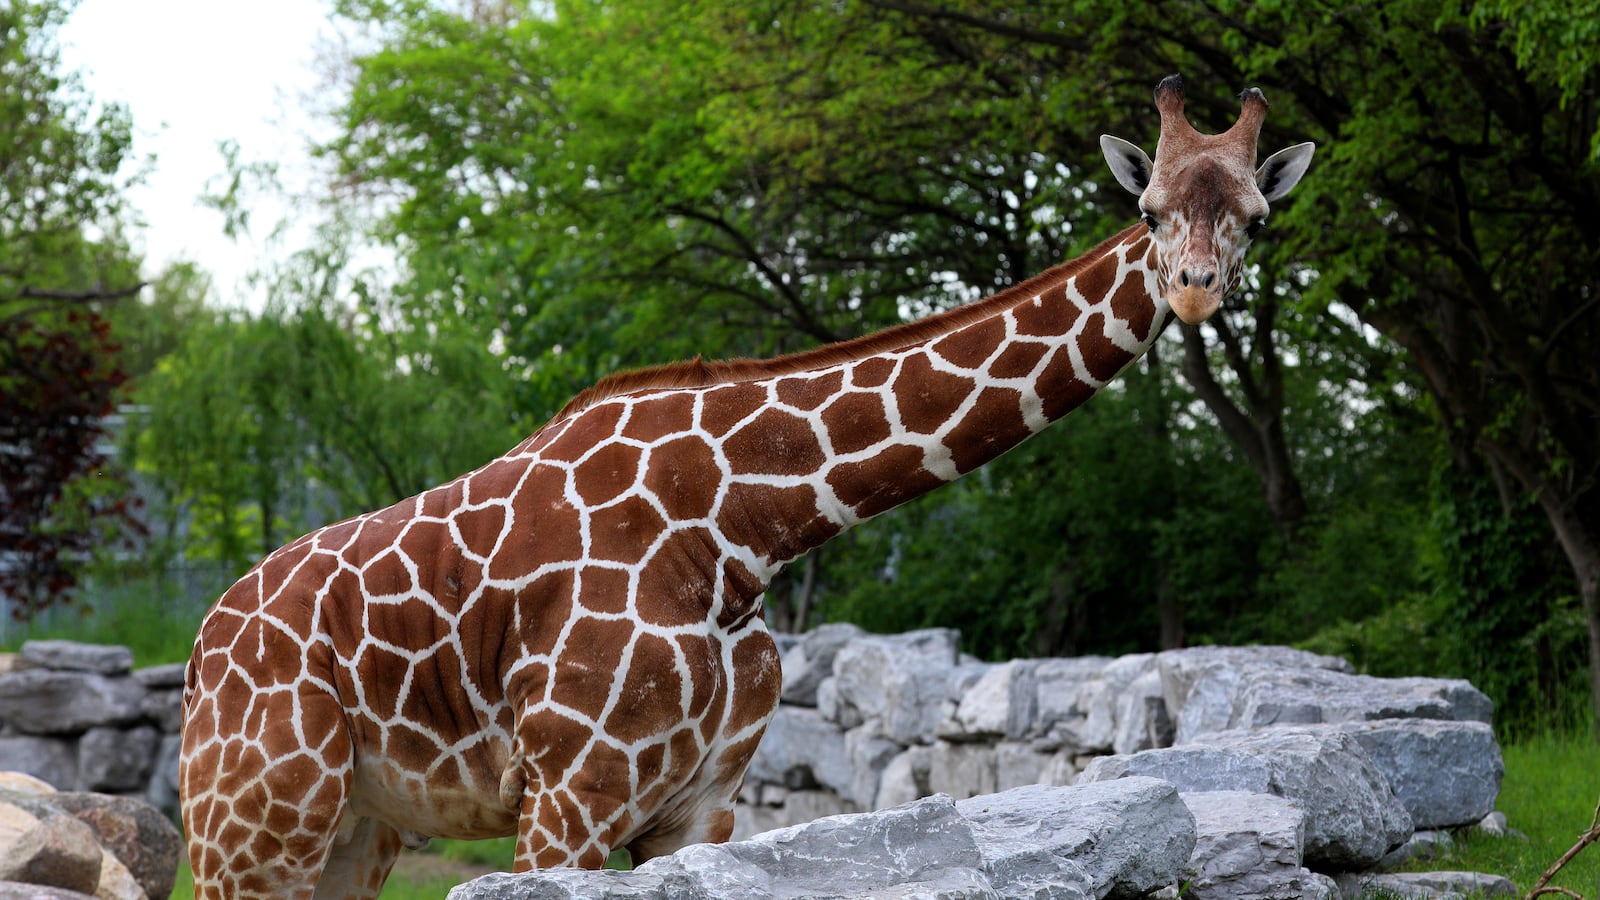 A giraffe at the Detroit Zoo, where students will soon take classes through a program at University Prep Science and Math High School.